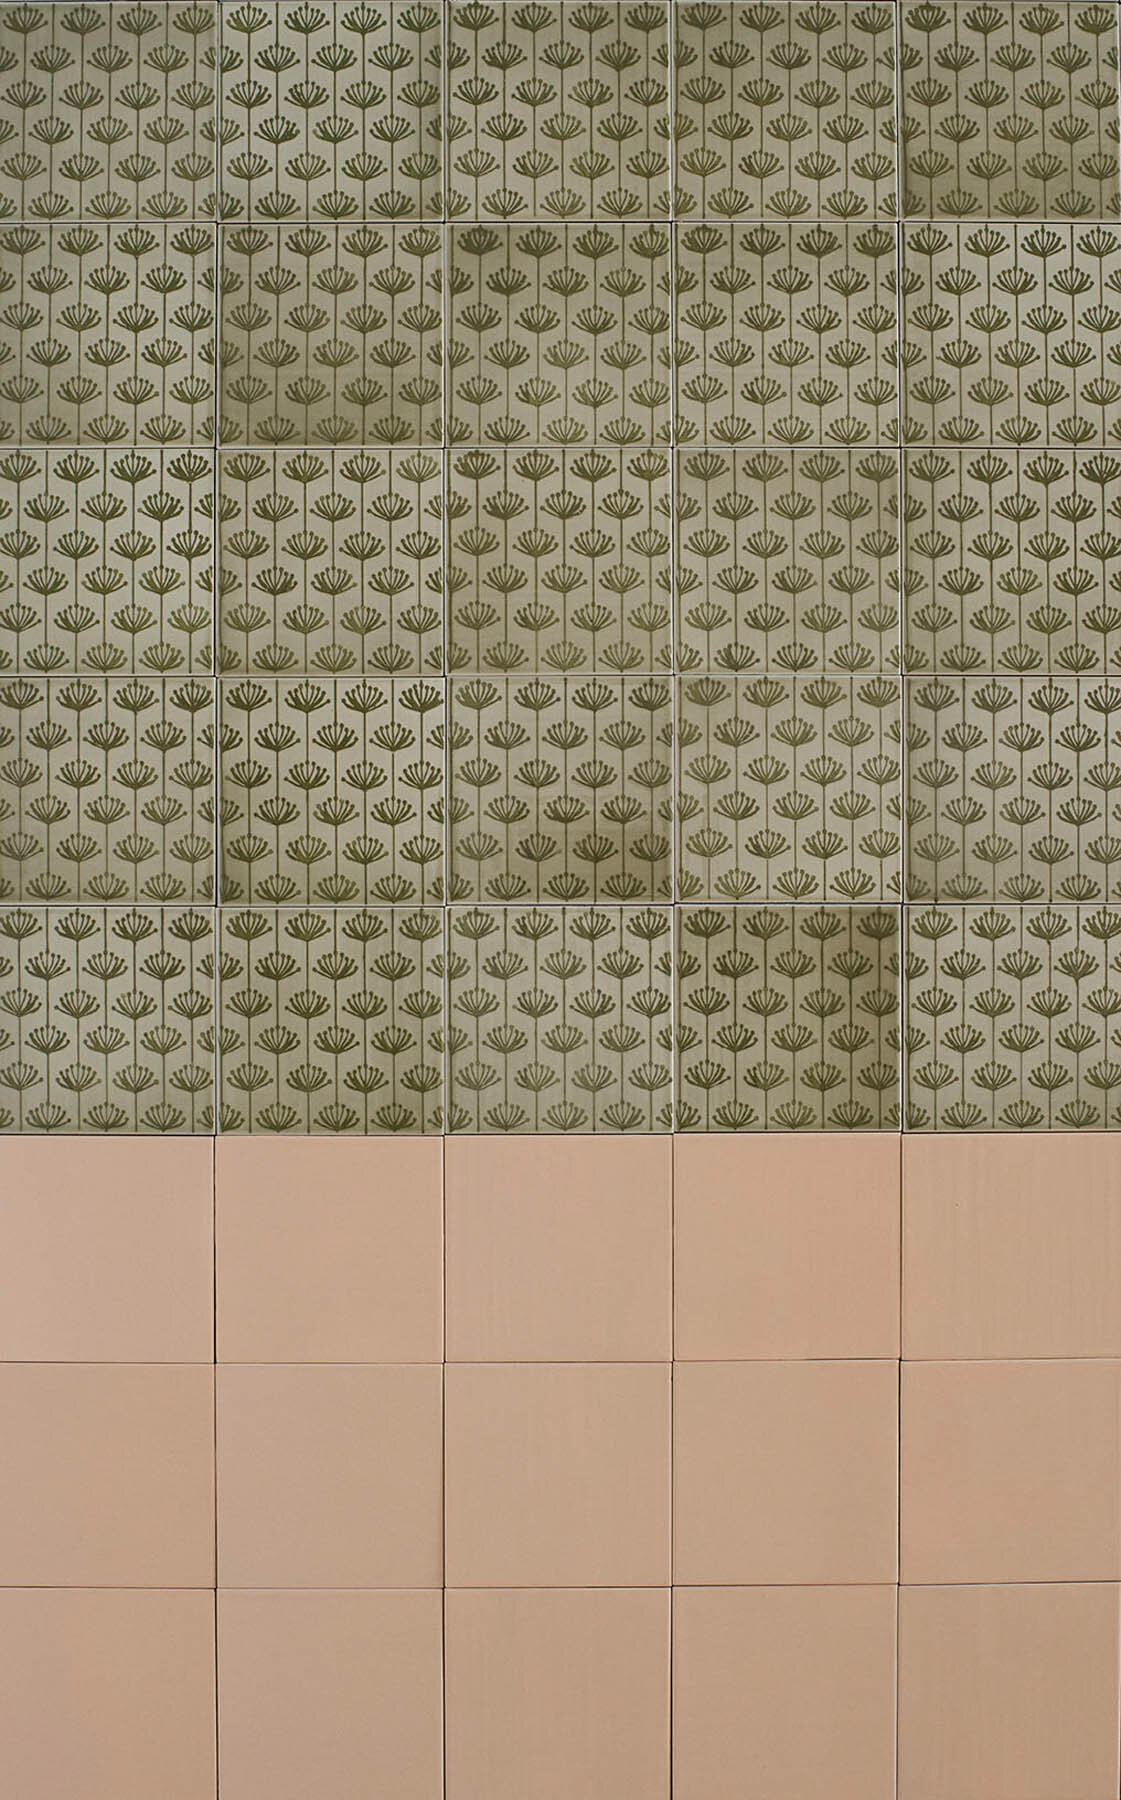 Showroom board with clay tiles in format 10x10x1 cm glazed with 'Pink Champagne Matt'